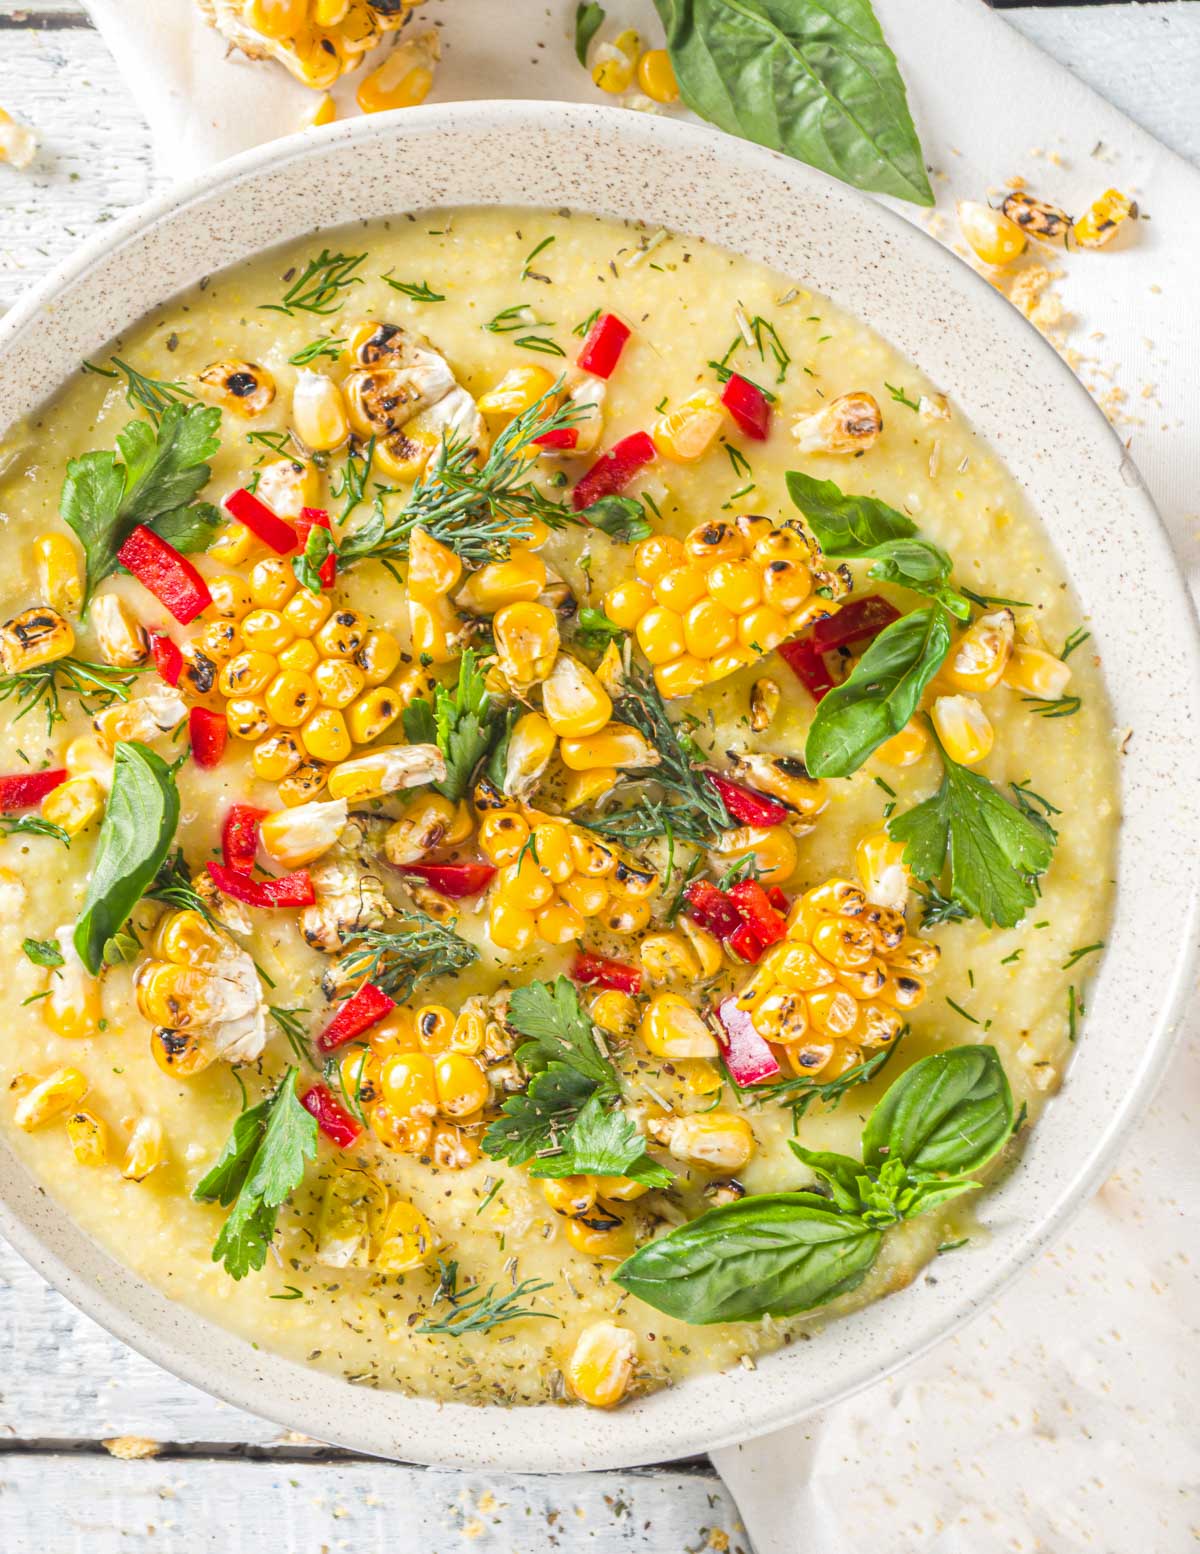 a bowl of vegan corn chowder topped with grilled corn pieces, fresh herbs and chopped red bell pepper